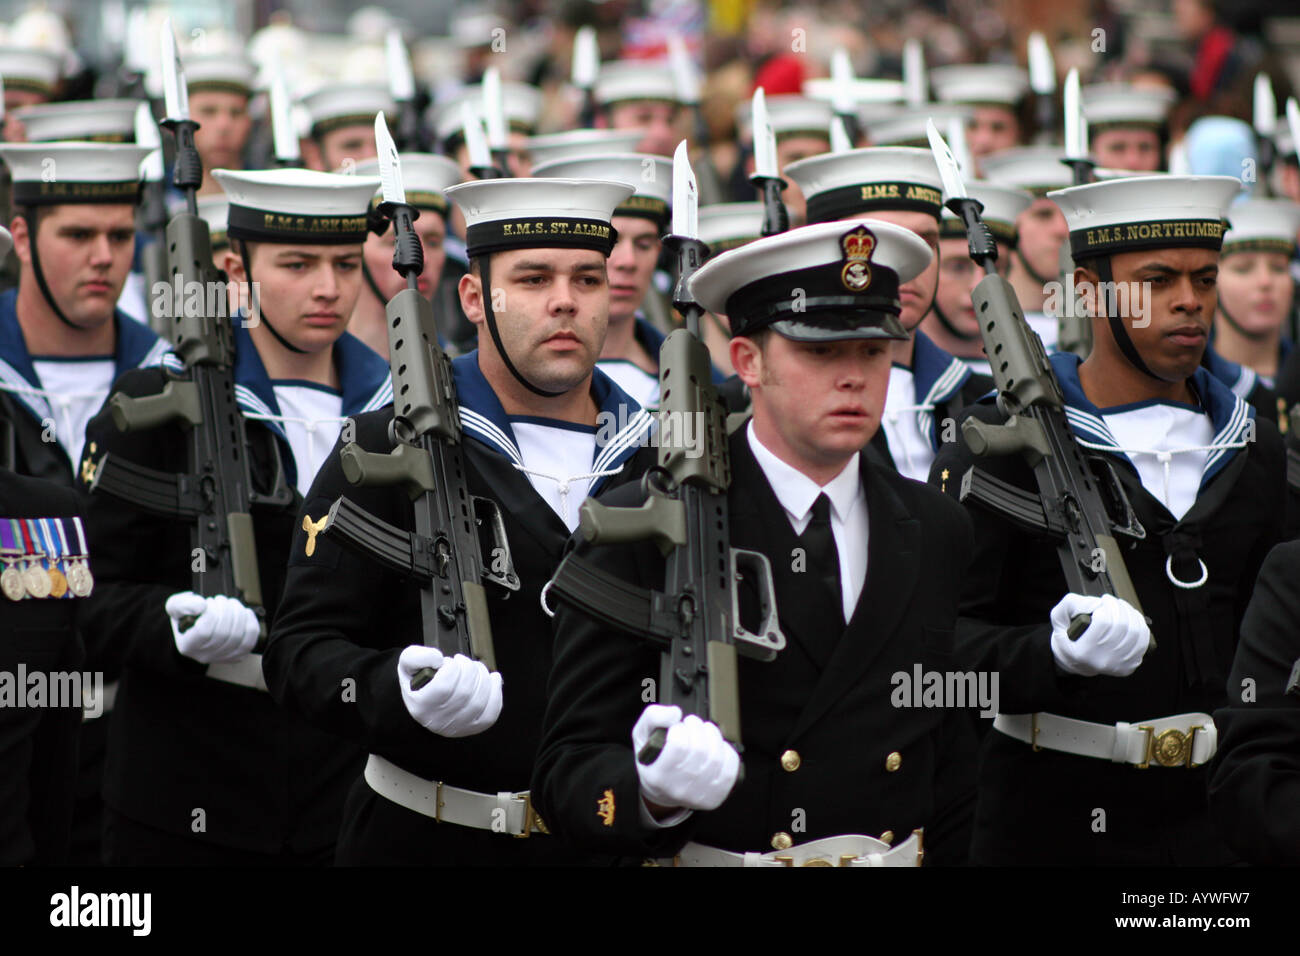 The Royal Navy marching contingent at the Lord Mayors Parade in London UK Stock Photo